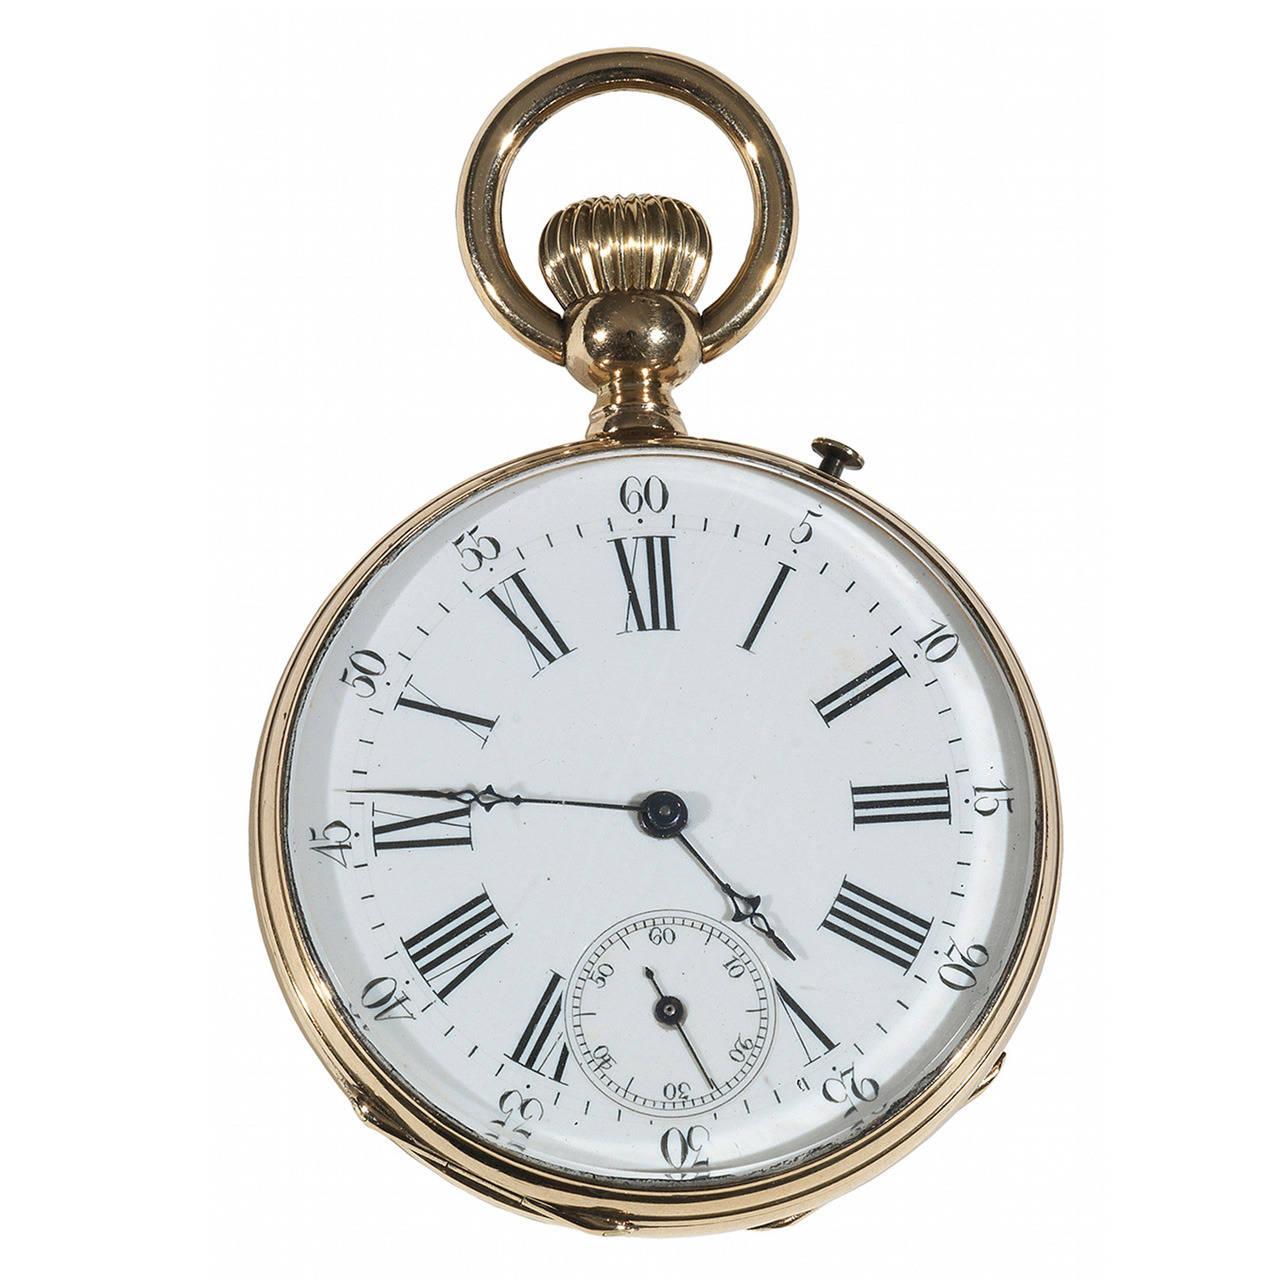 
18ct gold, with hinged double case back, crown winding and setting, enamel dial with printed black Roman hour markers and outer Arabic five minute chapter, steel Louis XV hands, subsidiary dial for running small seconds at six with steel baton